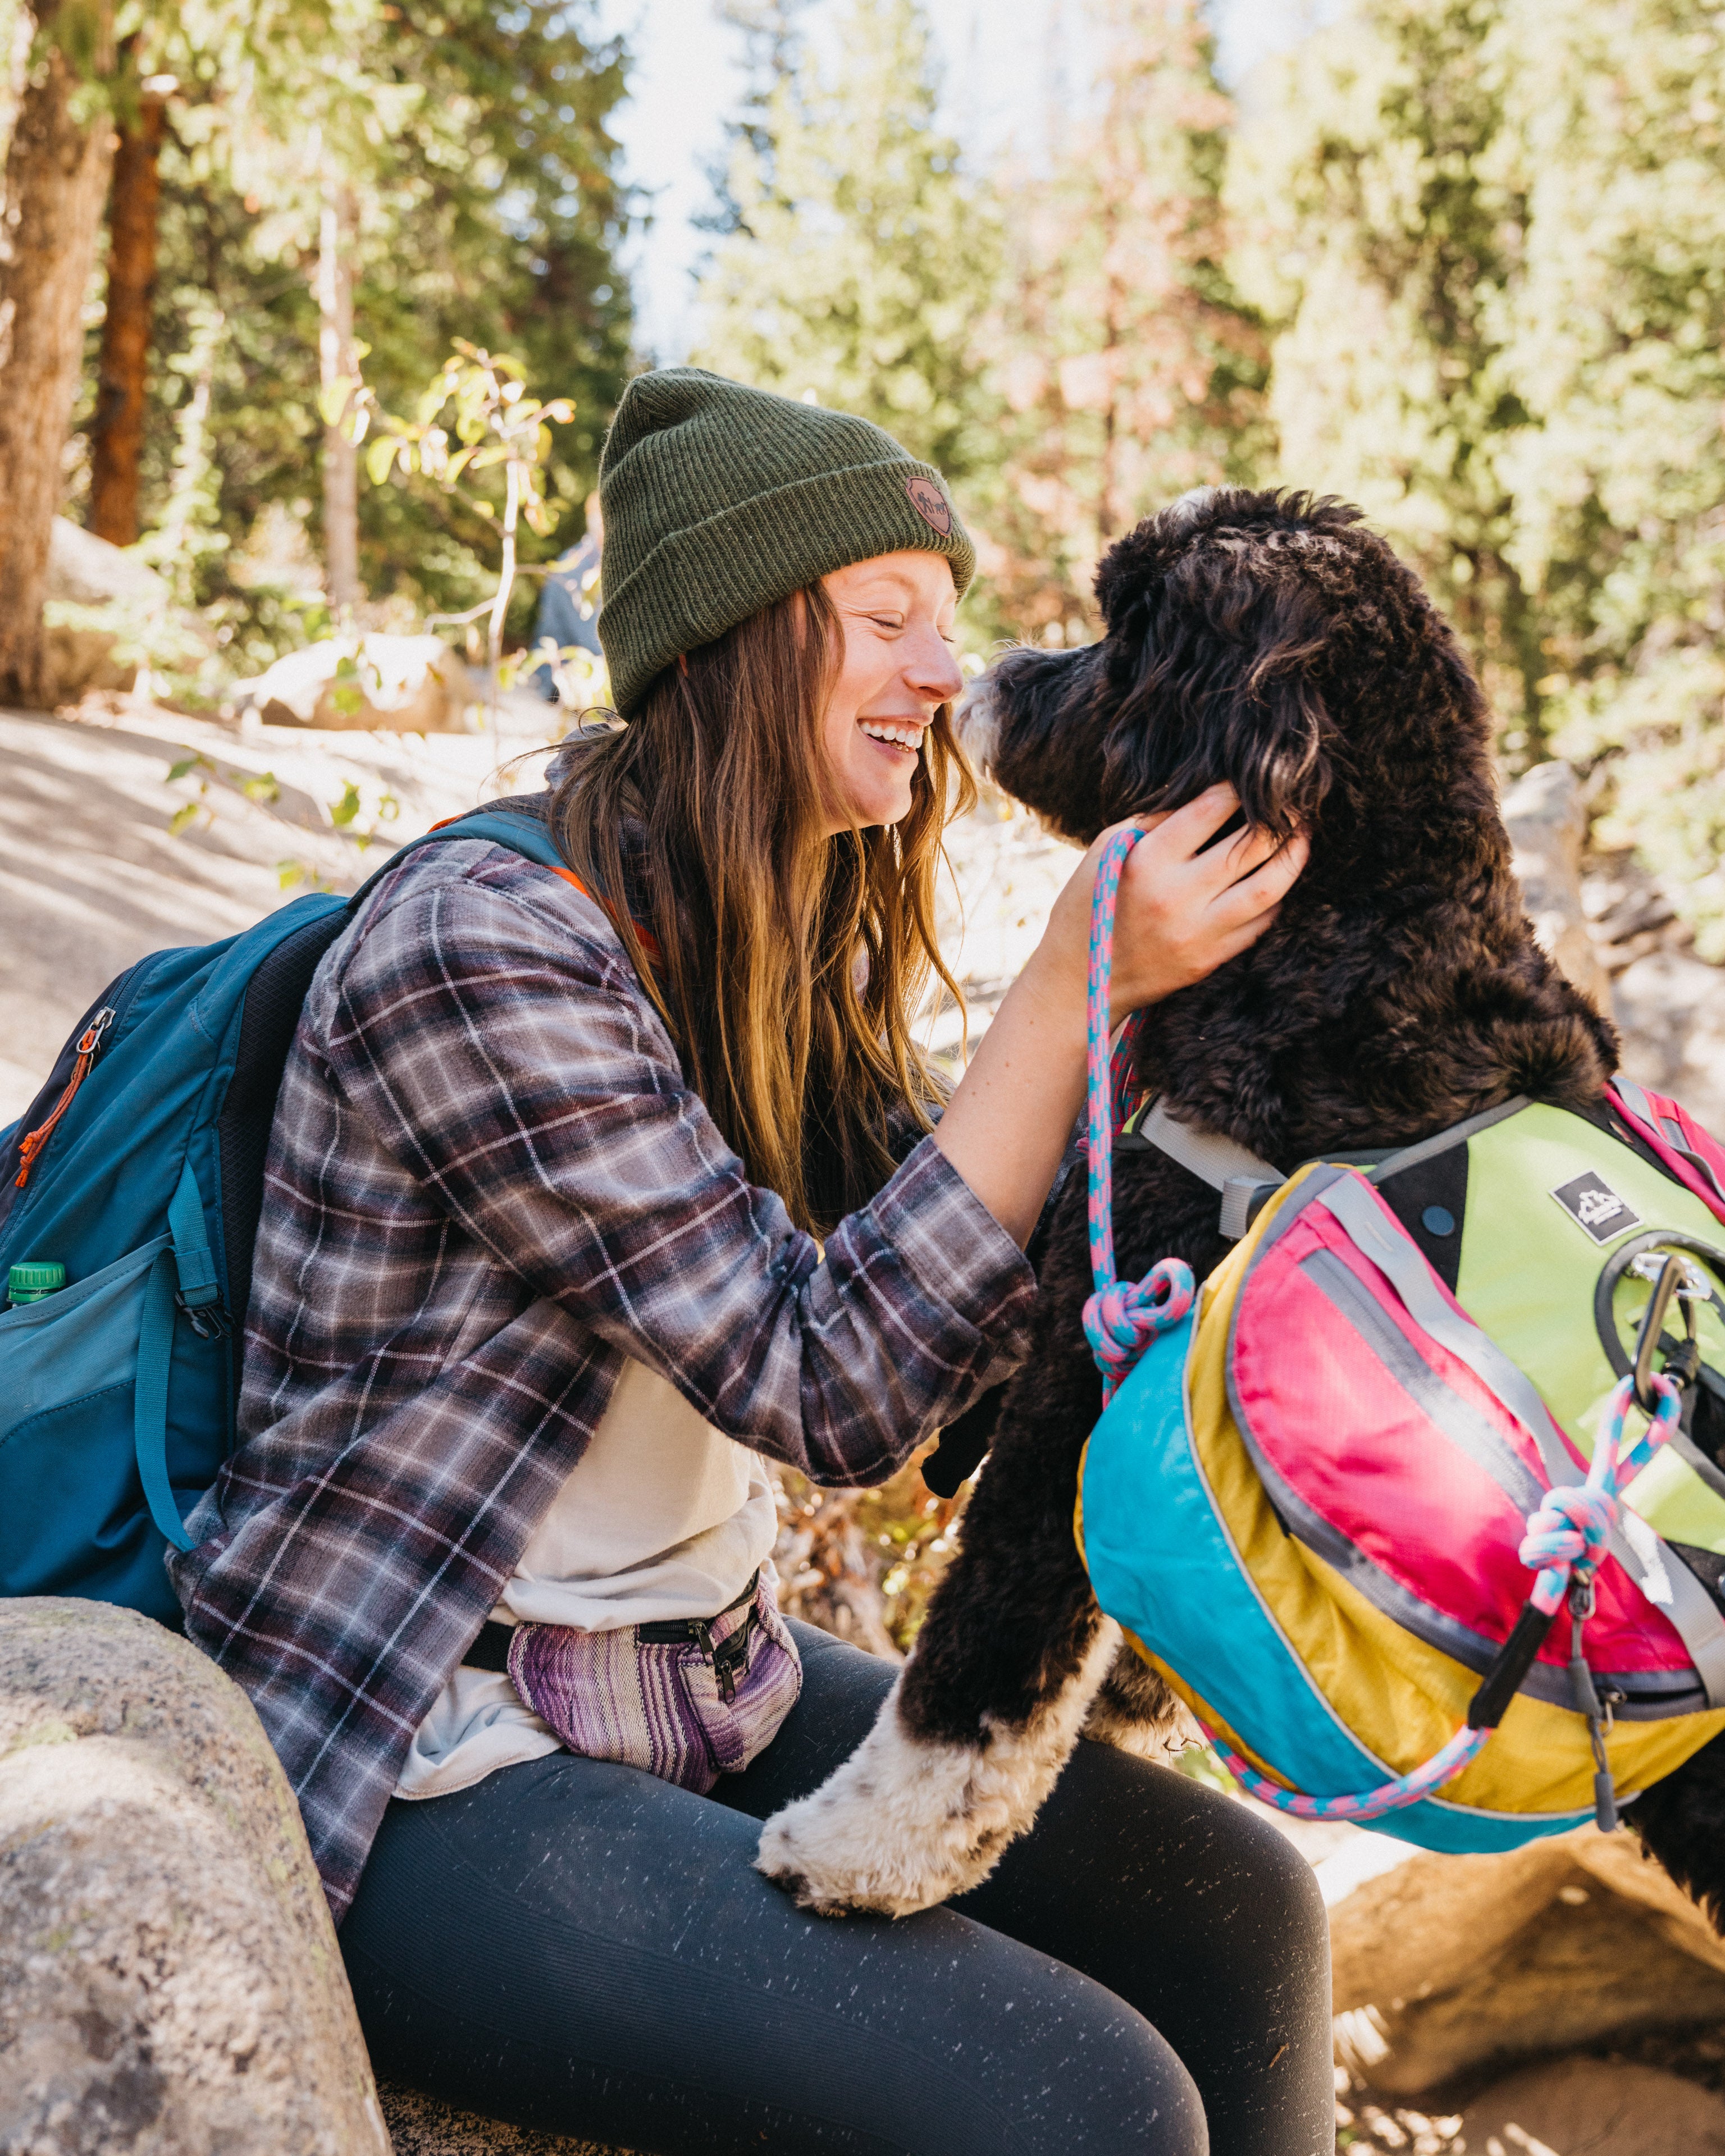 How To Camp With Your Dog in the Fall